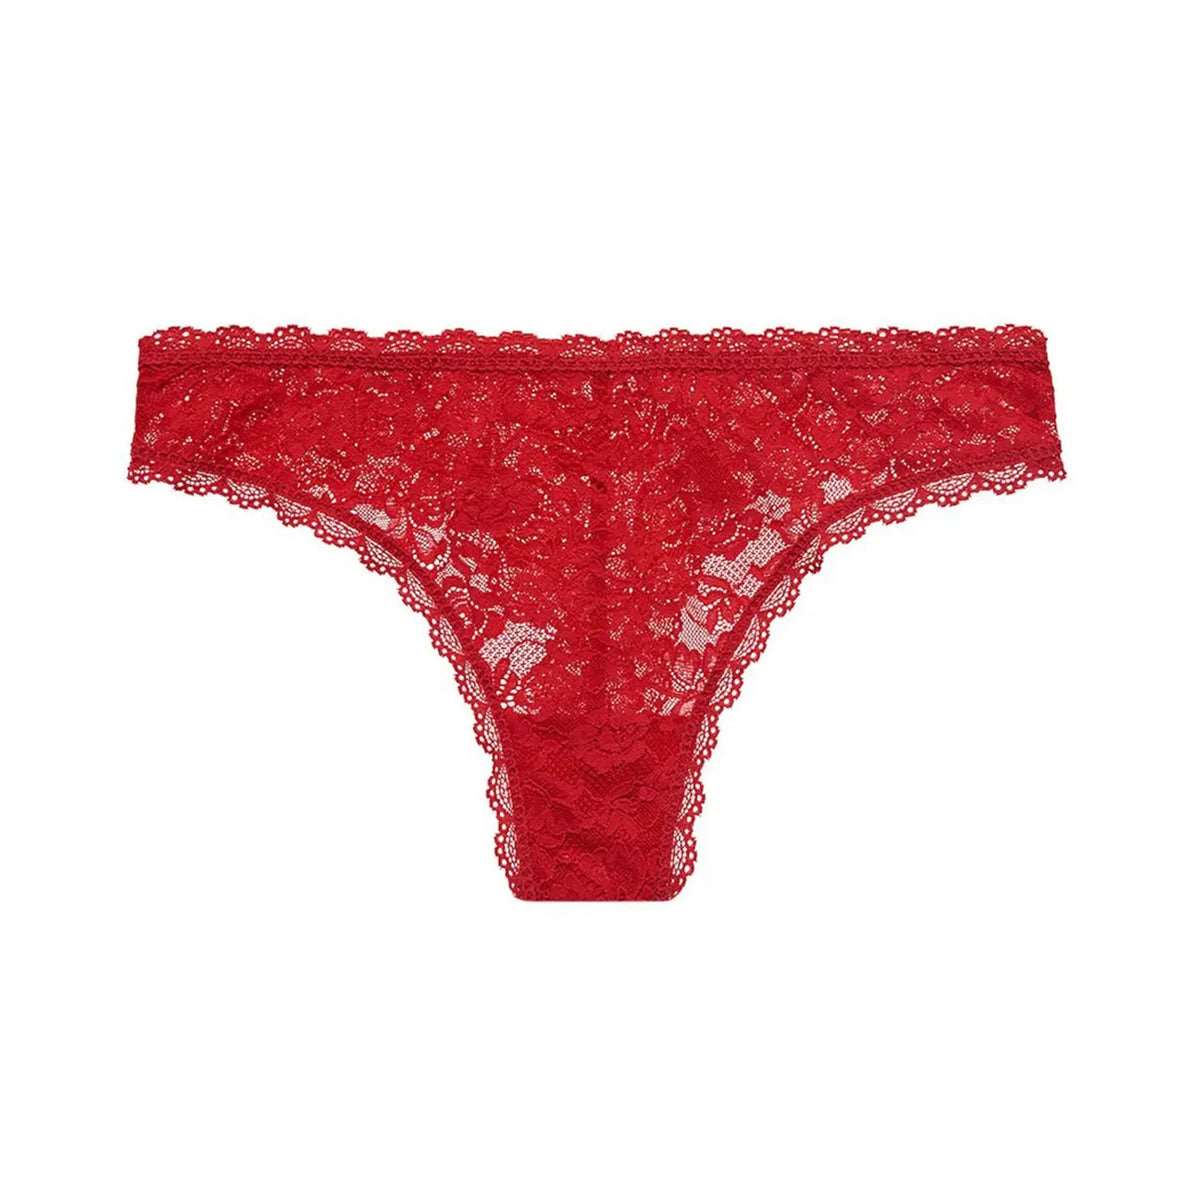 me. by bendon - Women's Red Thongs & G-Strings - Perfectly Me Thong Briefs  - Size S at The Iconic - ShopStyle